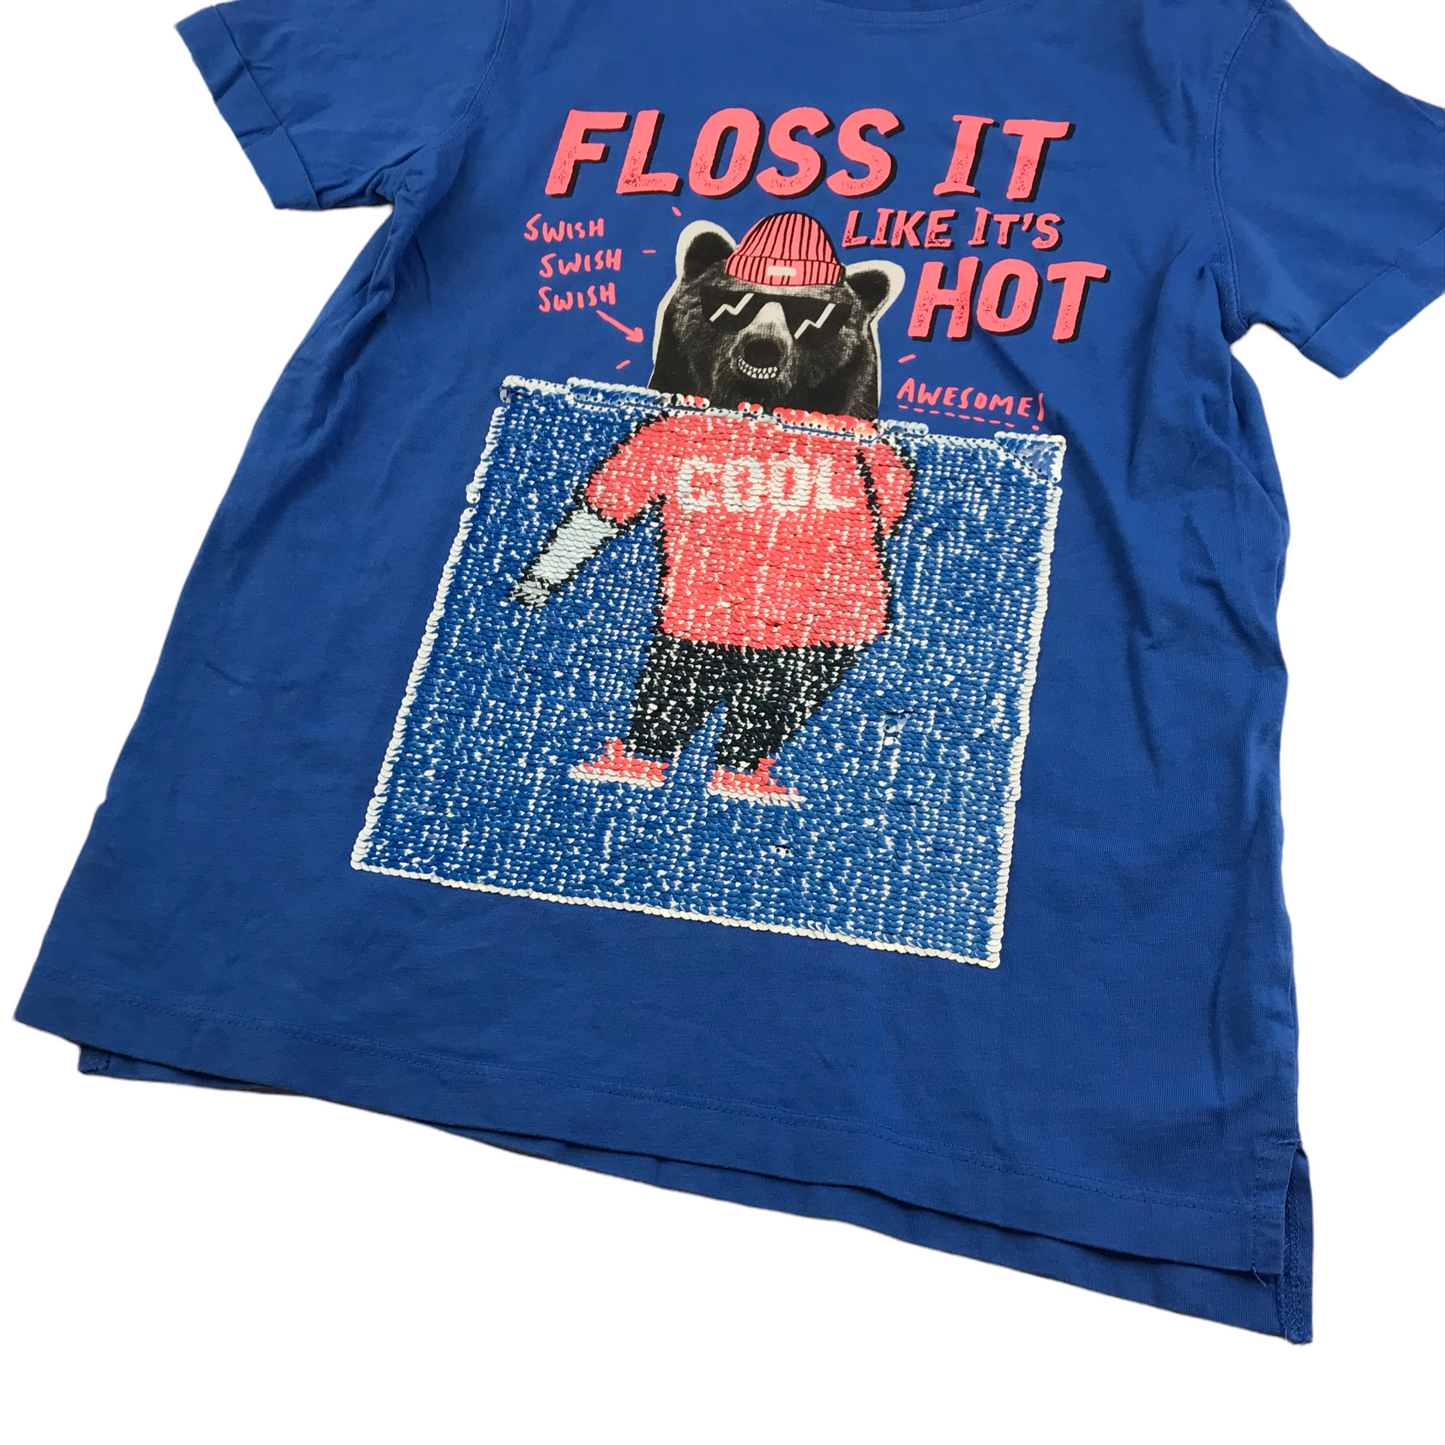 George Blue Sequin Floss T-shirt Age 9